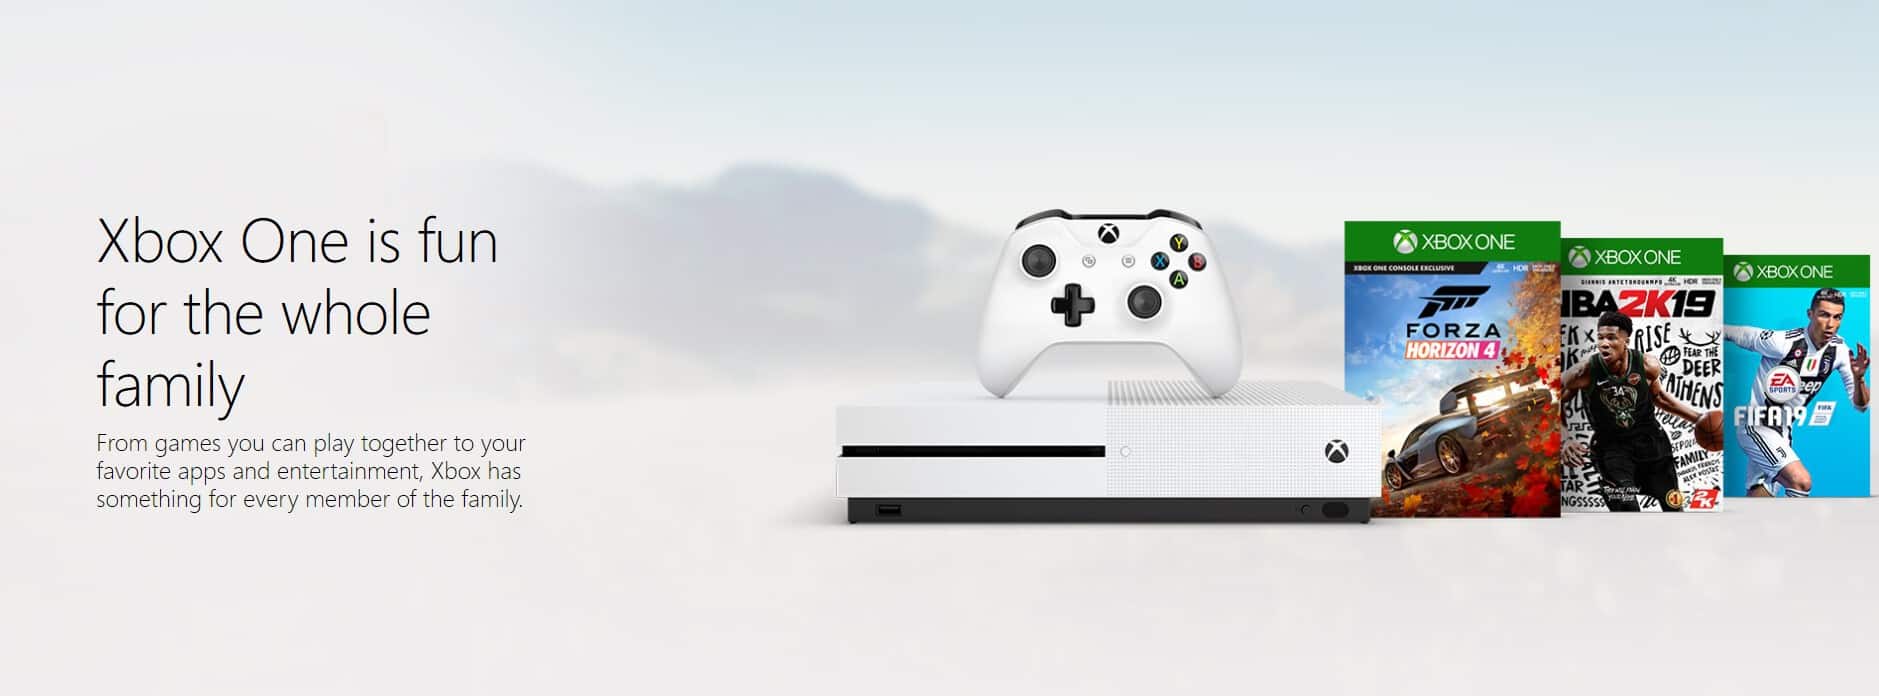 Microsoft readies "Xbox Family Guide" for holiday shoppers - OnMSFT.com - November 29, 2018